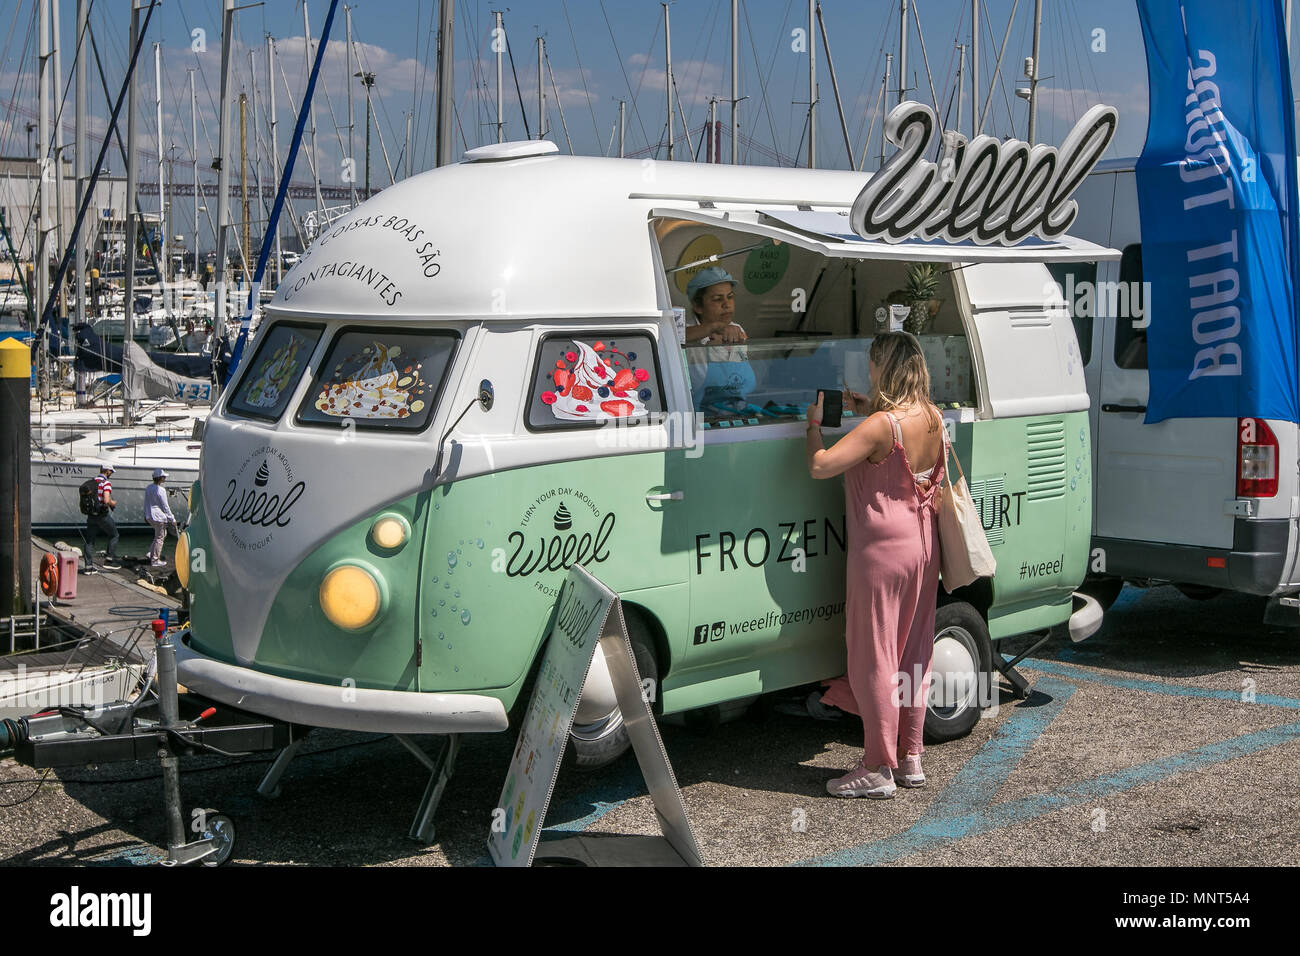 Lisbon, Portugal, May 5, 2018: Woman is buying something from a Weeel frozen yogurt truck at the square near Monument to the Discoveries. Stock Photo